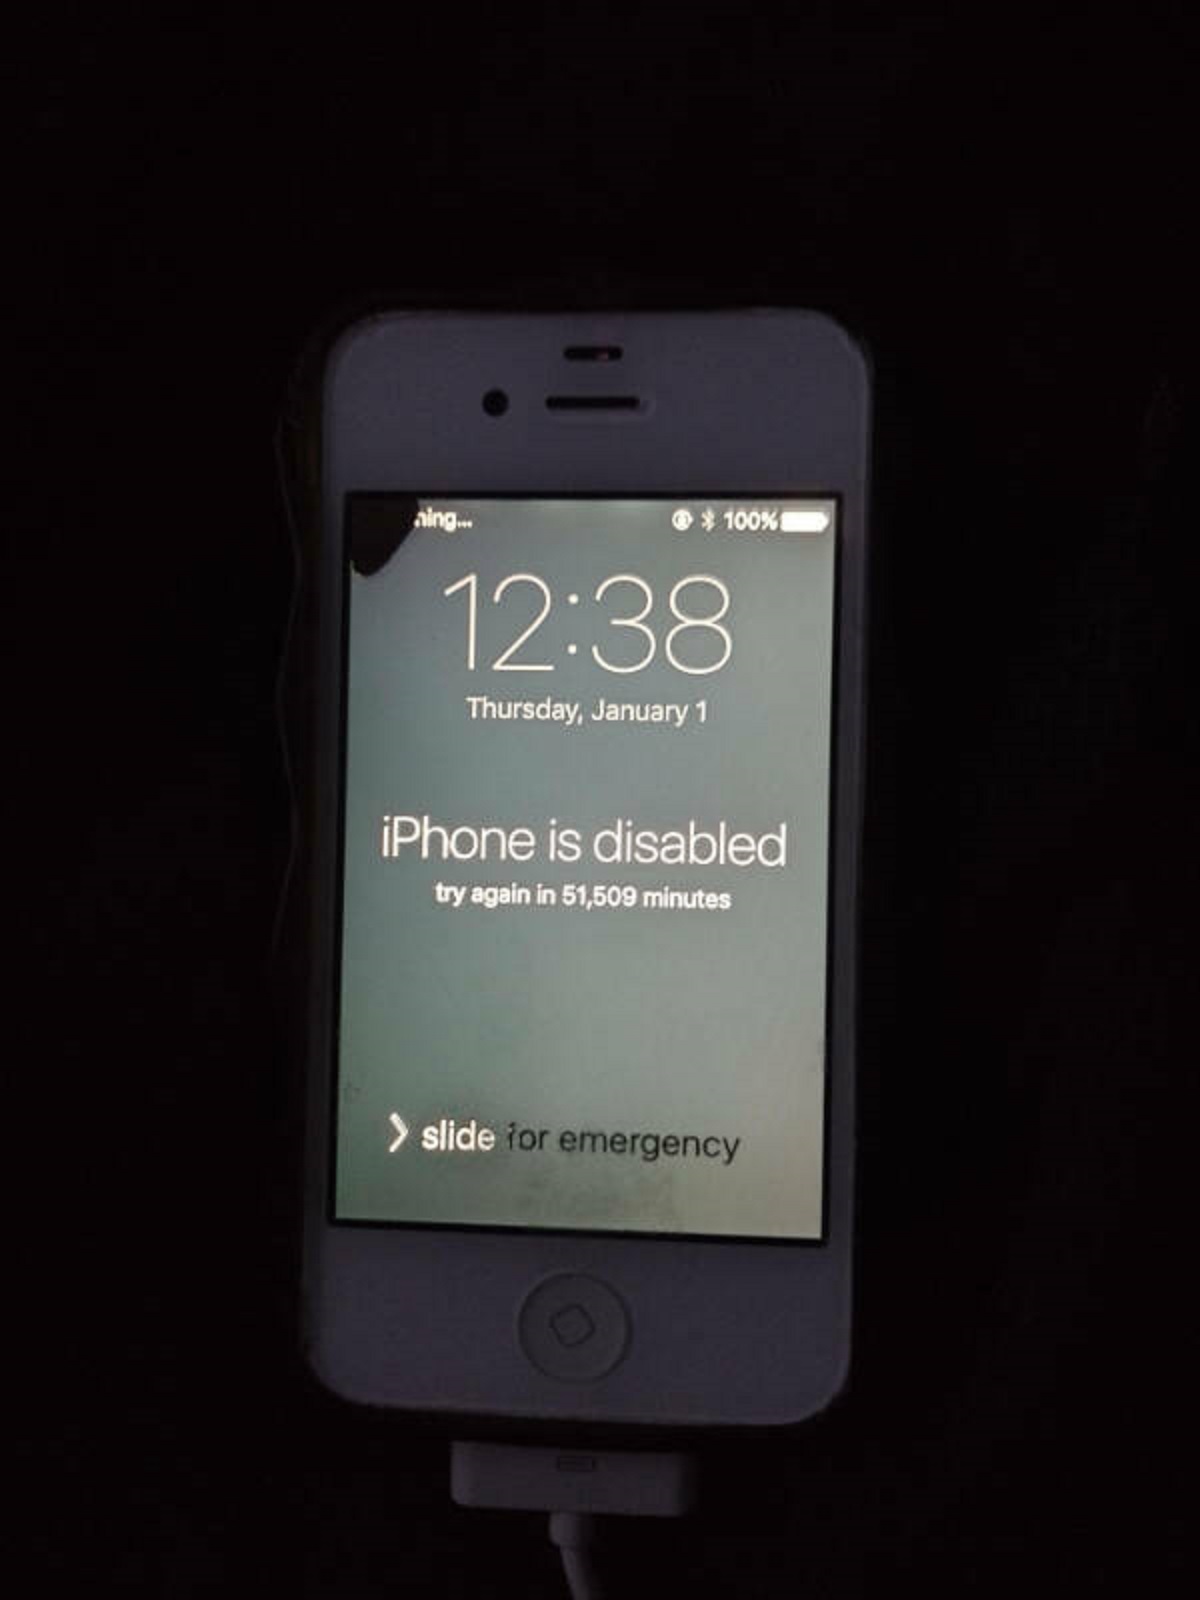 “My kid got ahold of my recently found iPhone 4S. Planned on retrieving photos and It’s going to take a few guesses for what the password is.”